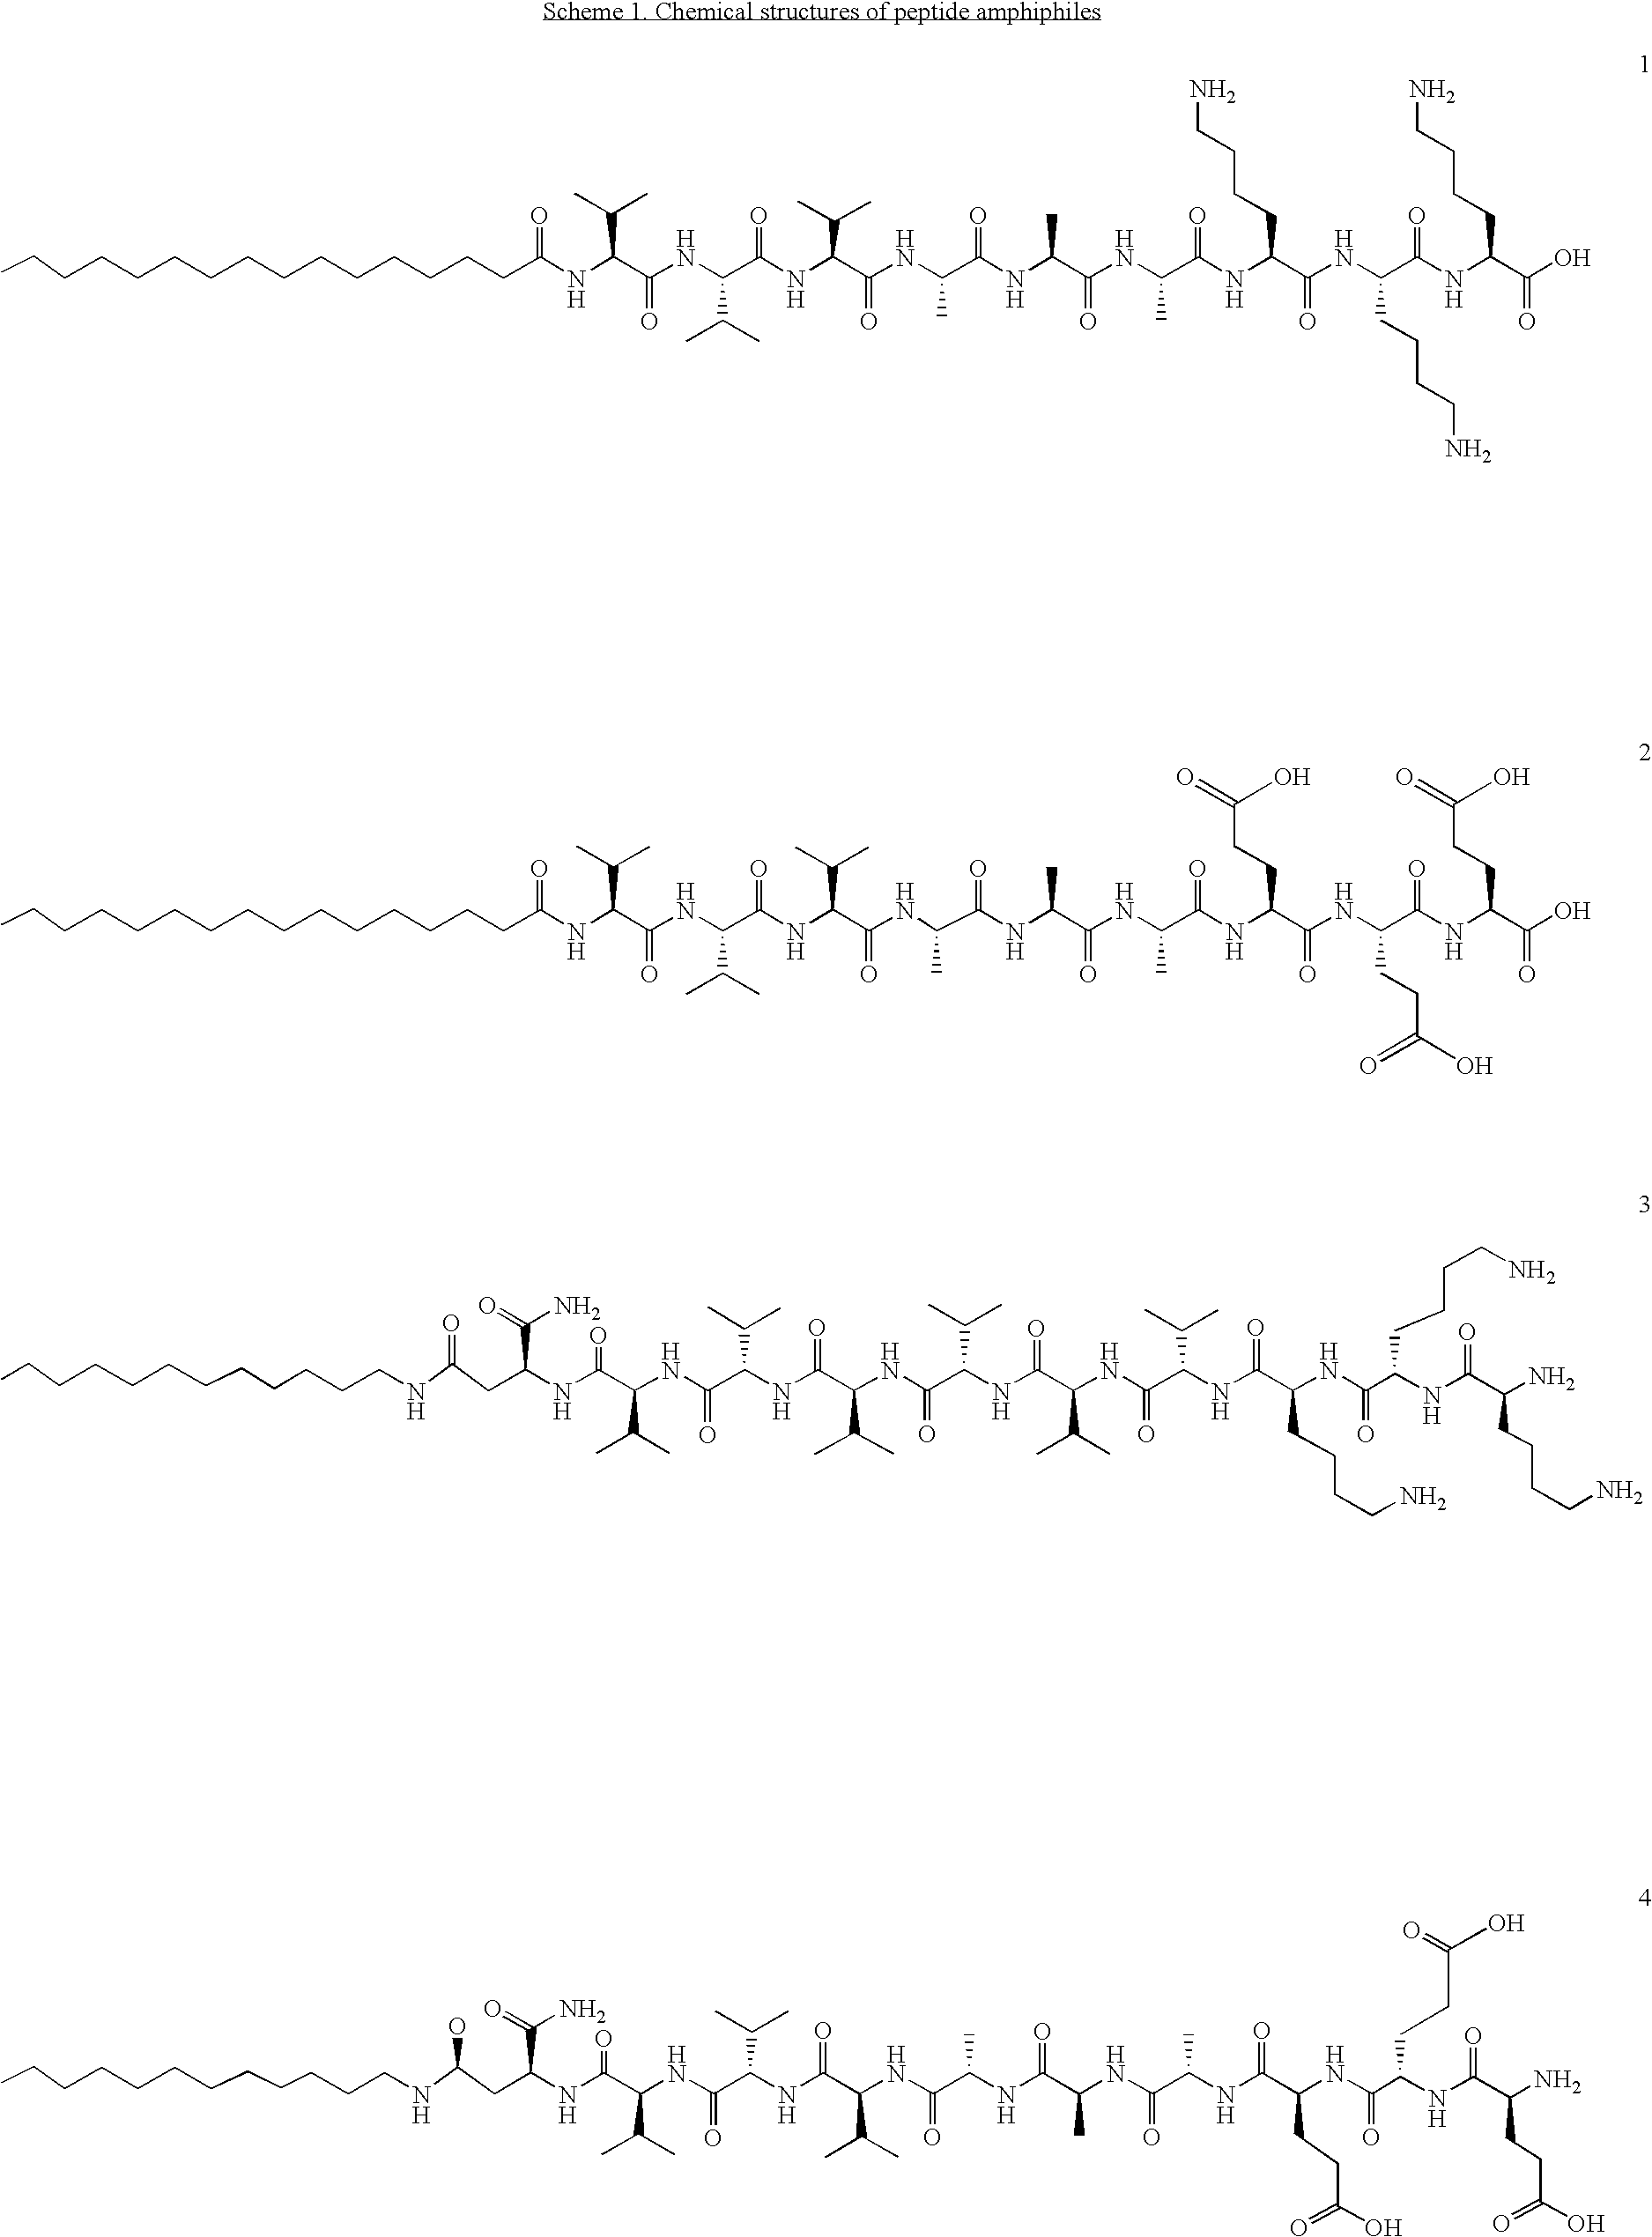 Self-assembling peptide amphiphiles and related methods for growth factor delivery